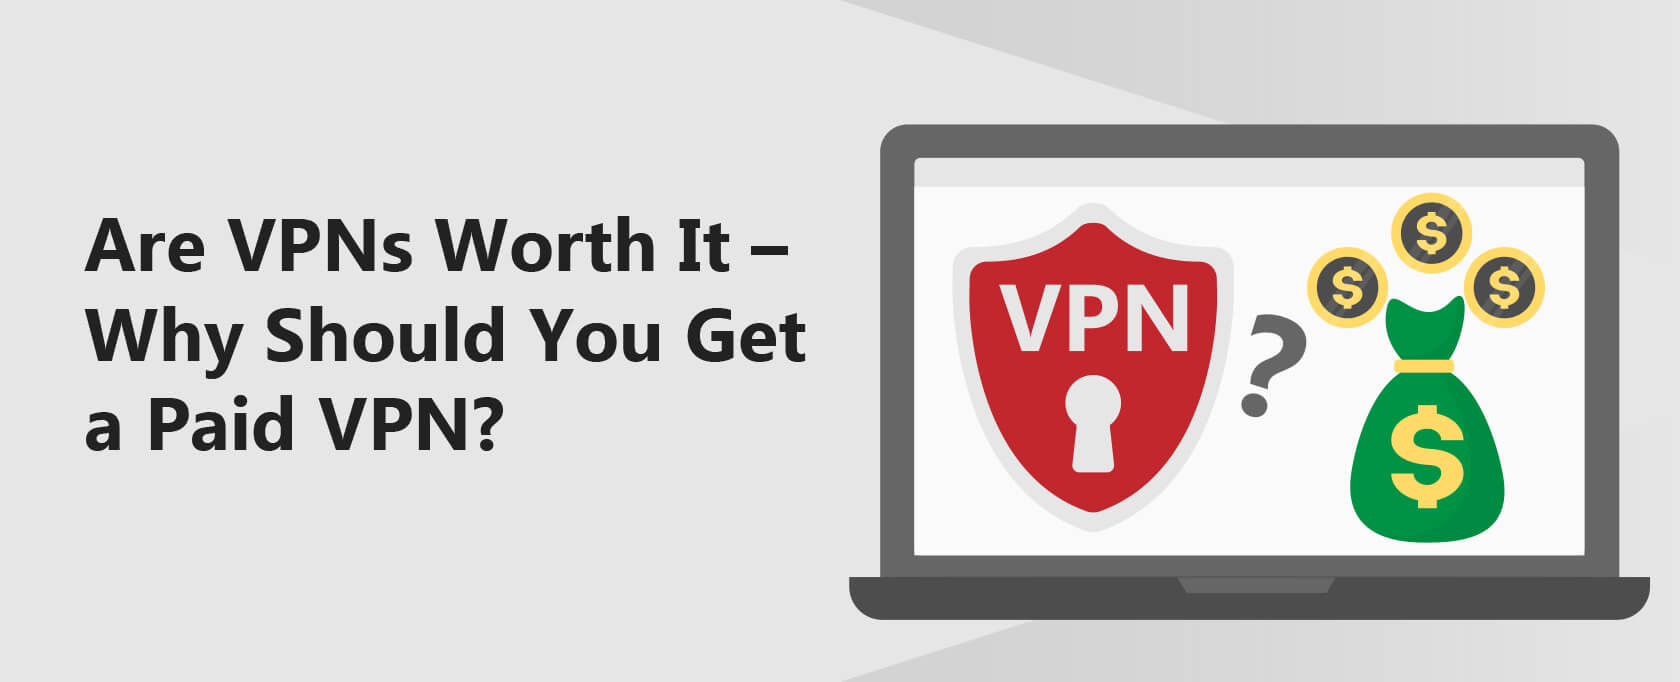 Are VPNs Worth It?